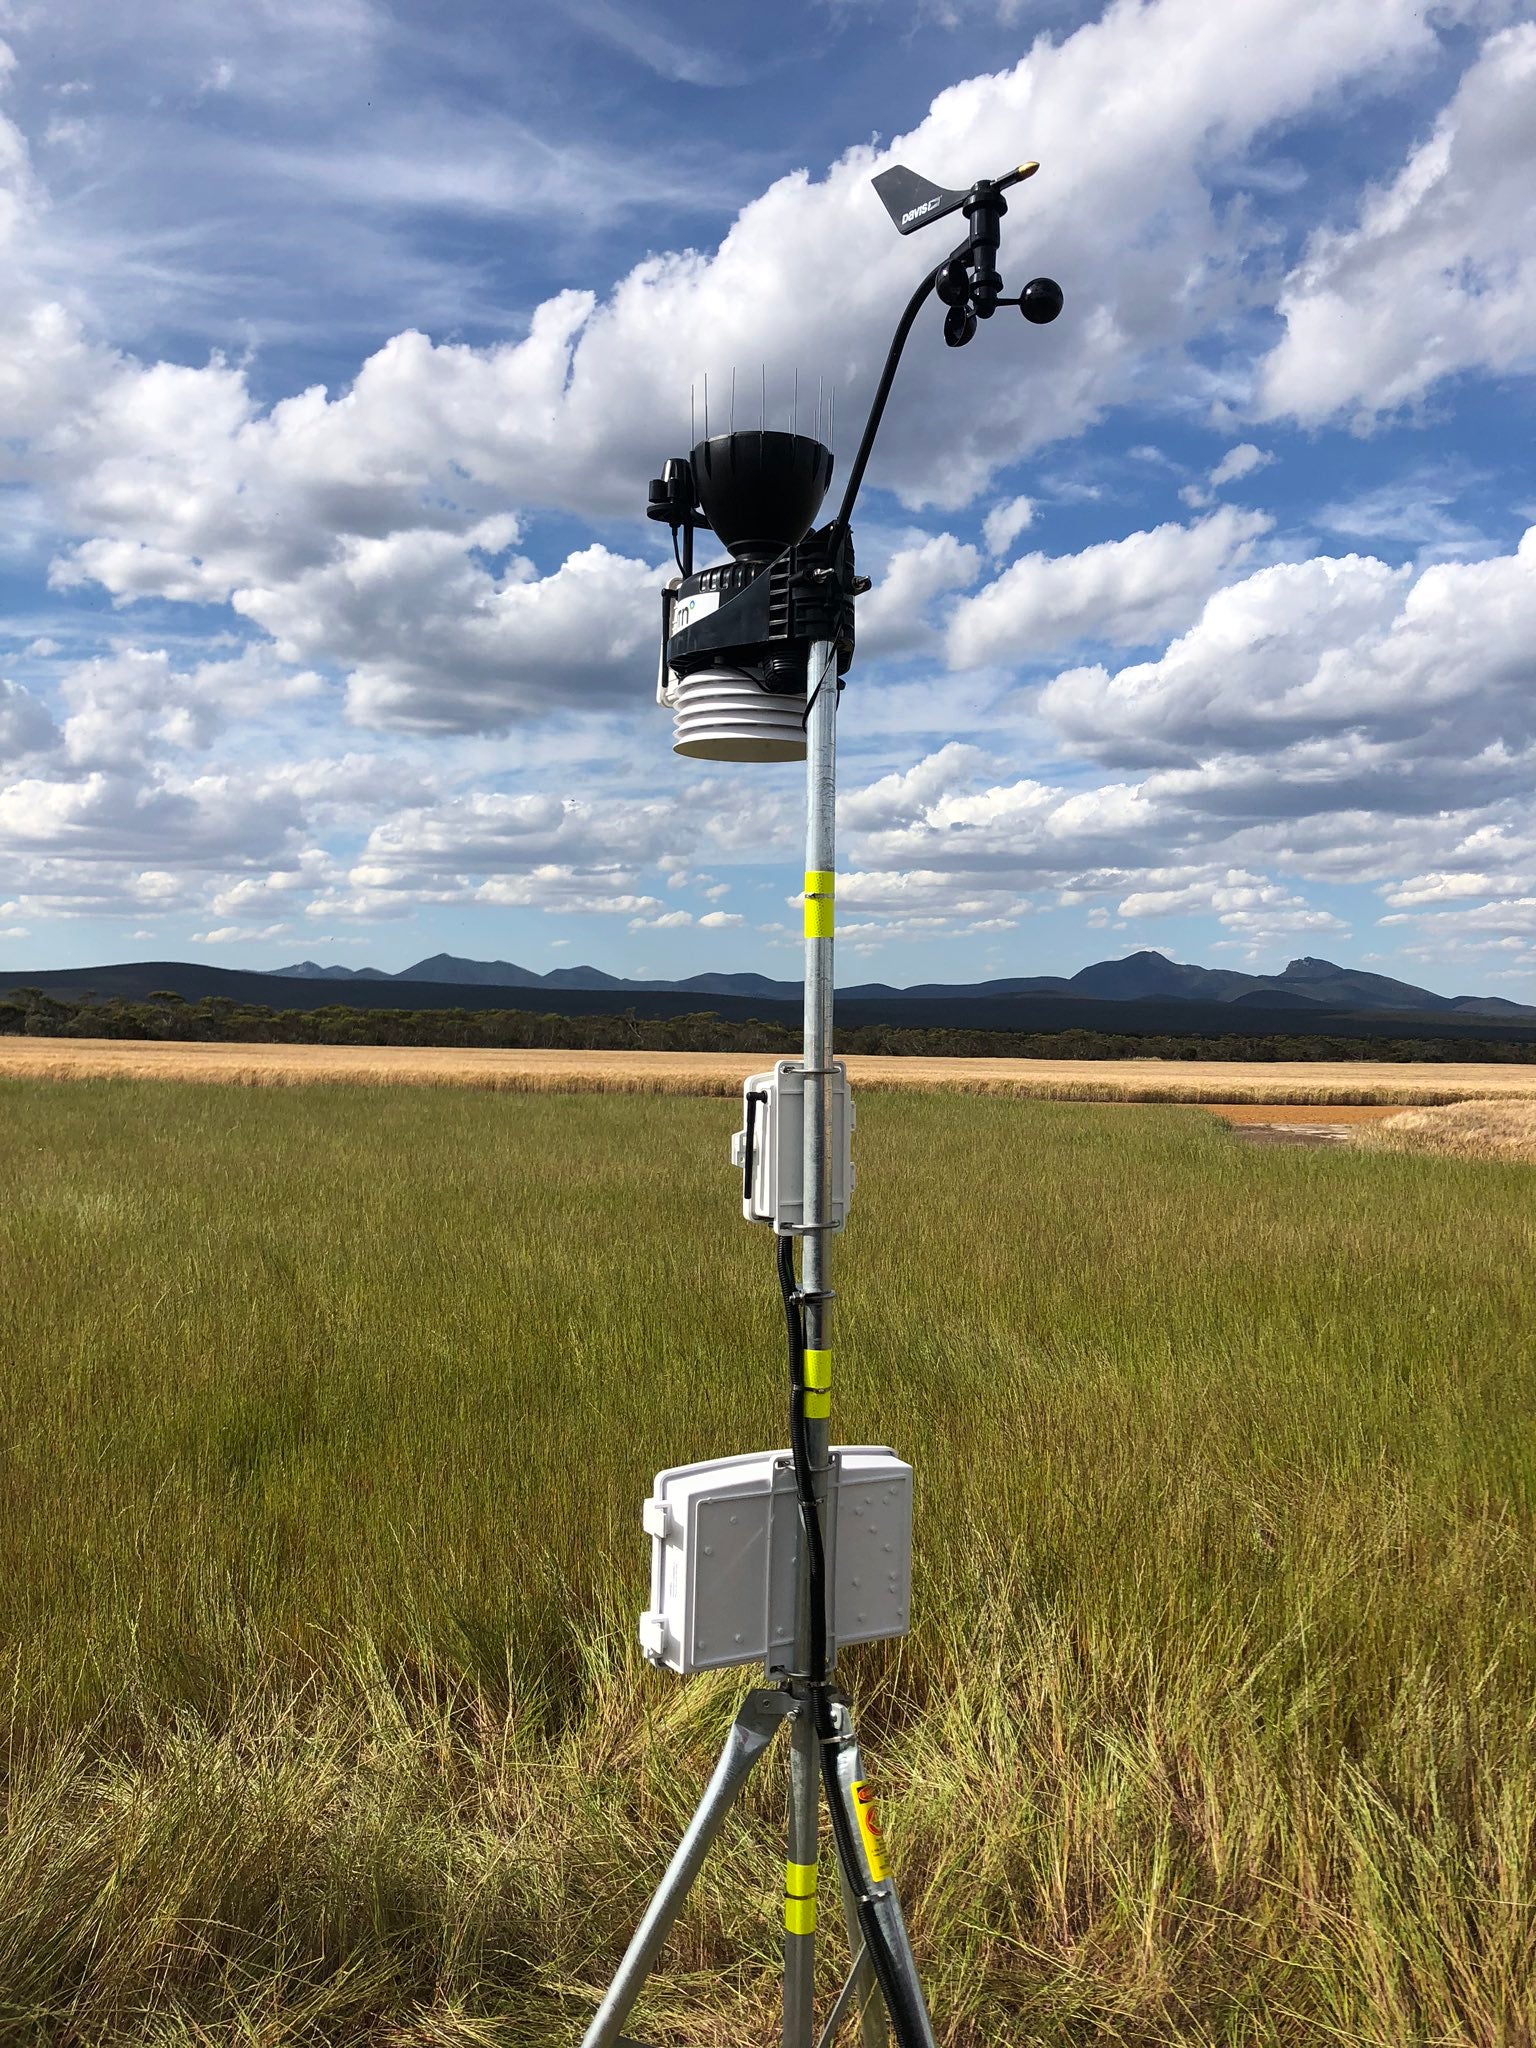 Vantage Pro2 weather station on mounting tripod in field